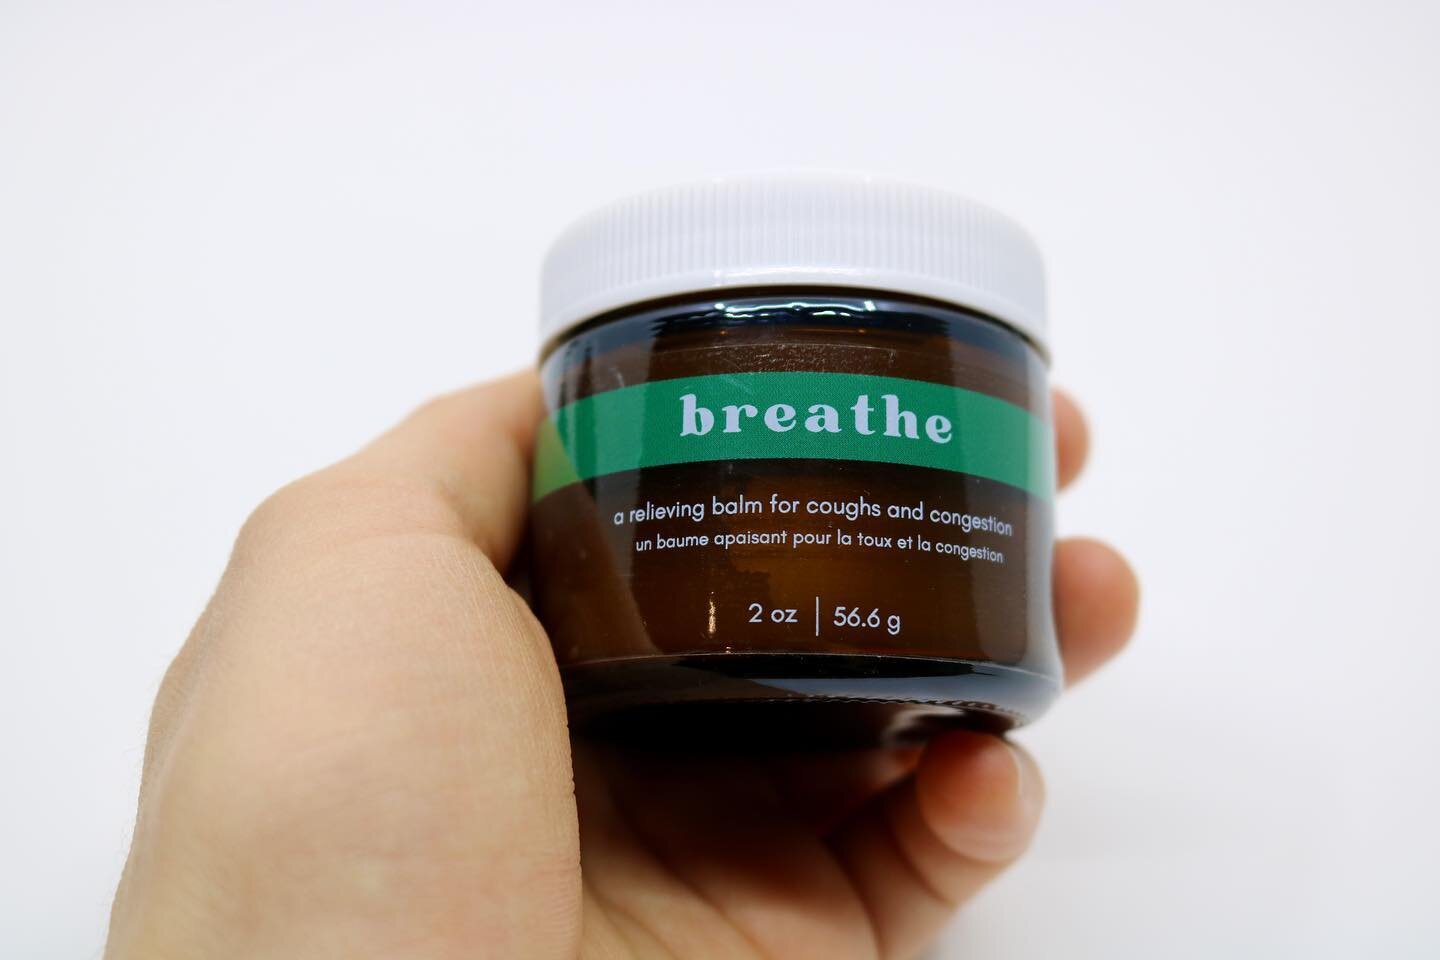 Introducing the breathe balm ❄️

Designed for winter, the breathe balm is made with expectorating essential oils to enhance breathing and reduce infections 🦠

Simply rub across the chest as a vapour rub, allowing the salve to absorb through the 